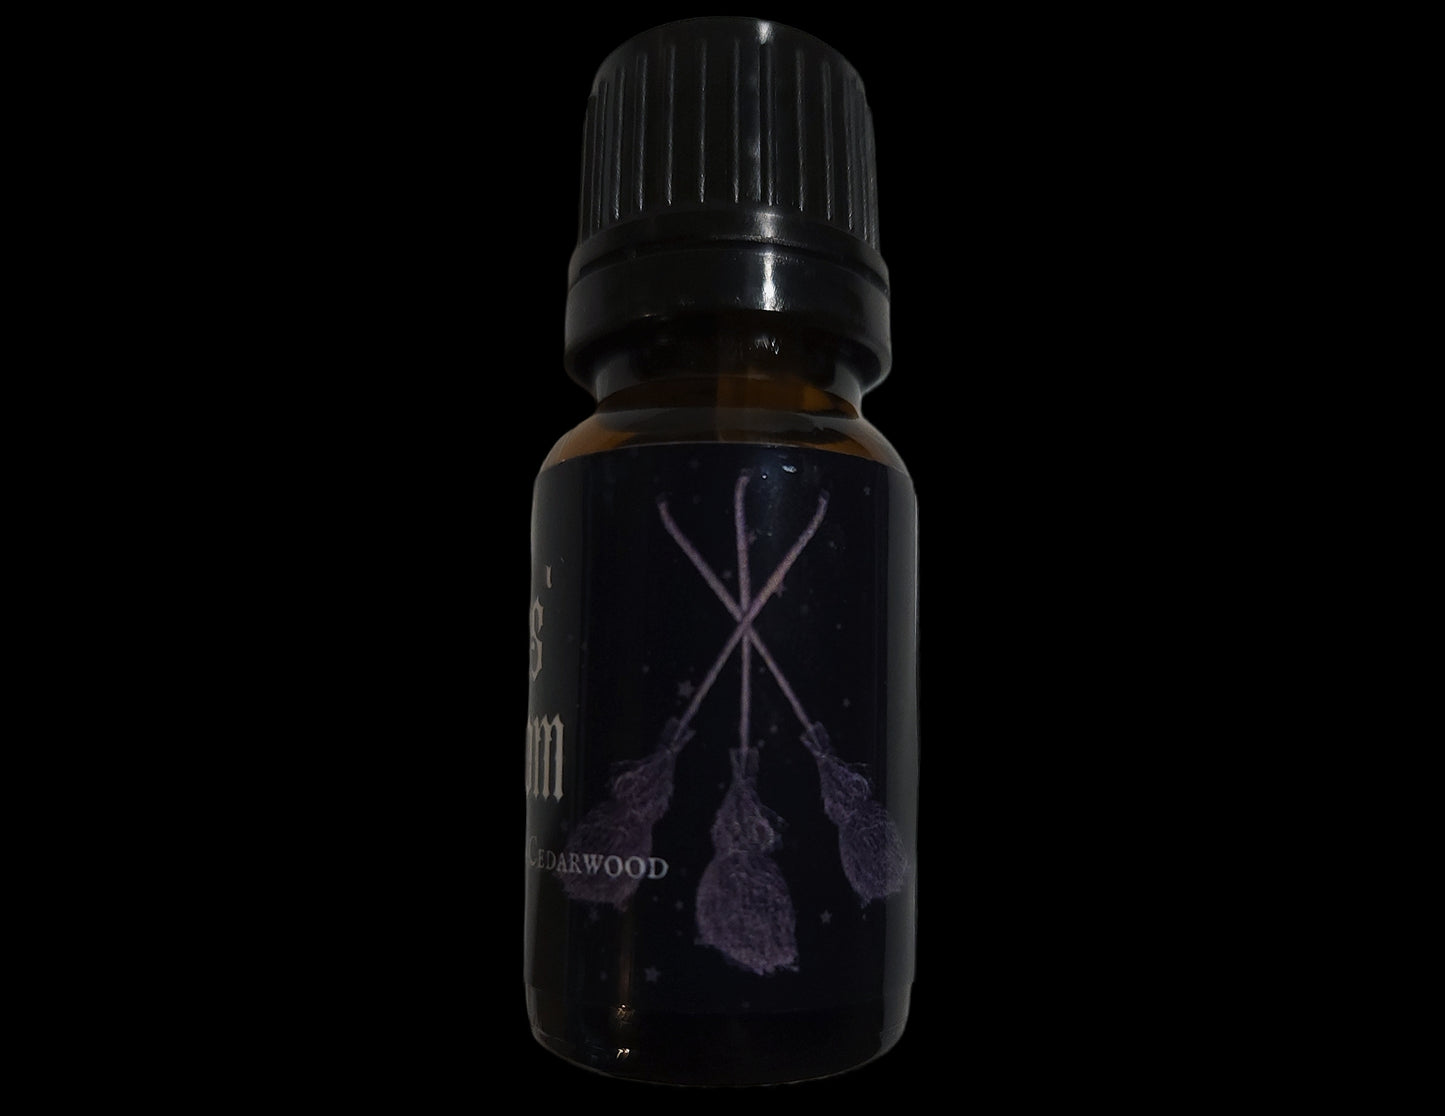 Witches Broom Perfume Oil